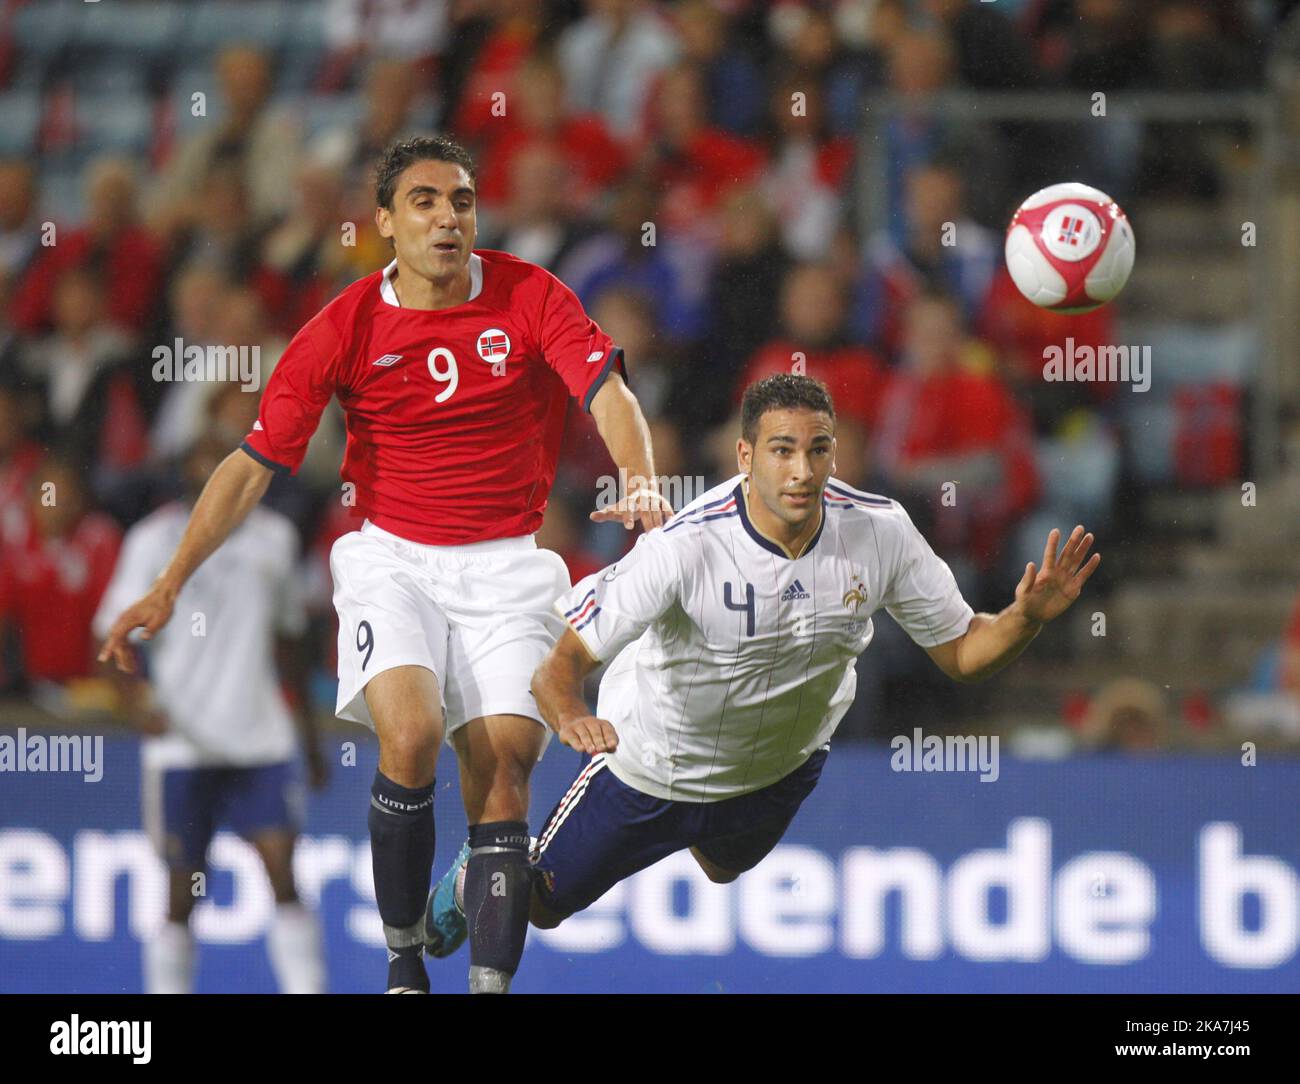 Adil Rami (R) and Mohammed Abdellaoue (L) battle for the ball Stock Photo